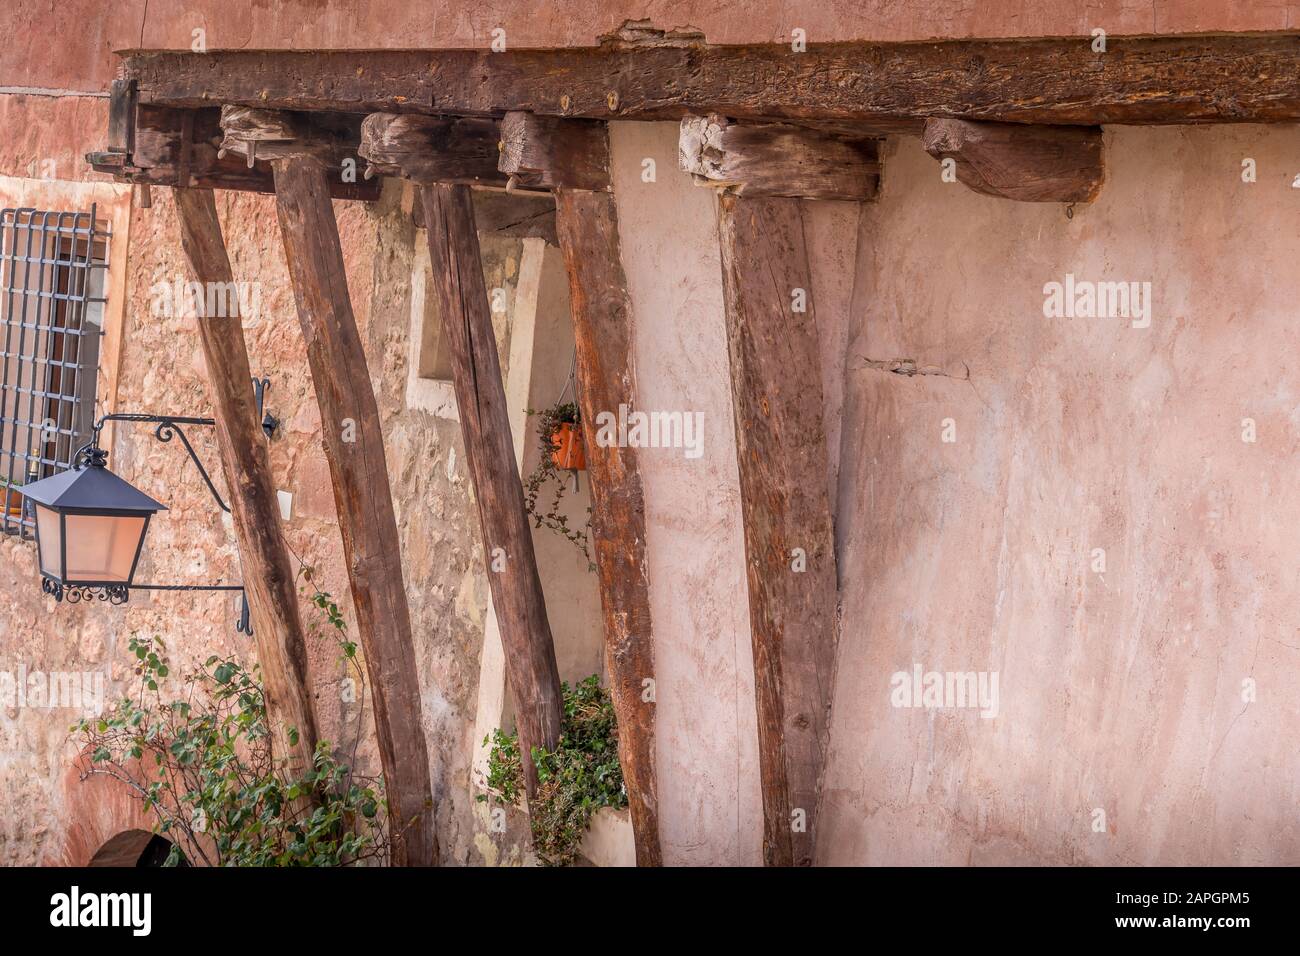 Wooden beams holding up a medieval house with red terracotta walls in Albarracin Teruel province Spain Stock Photo